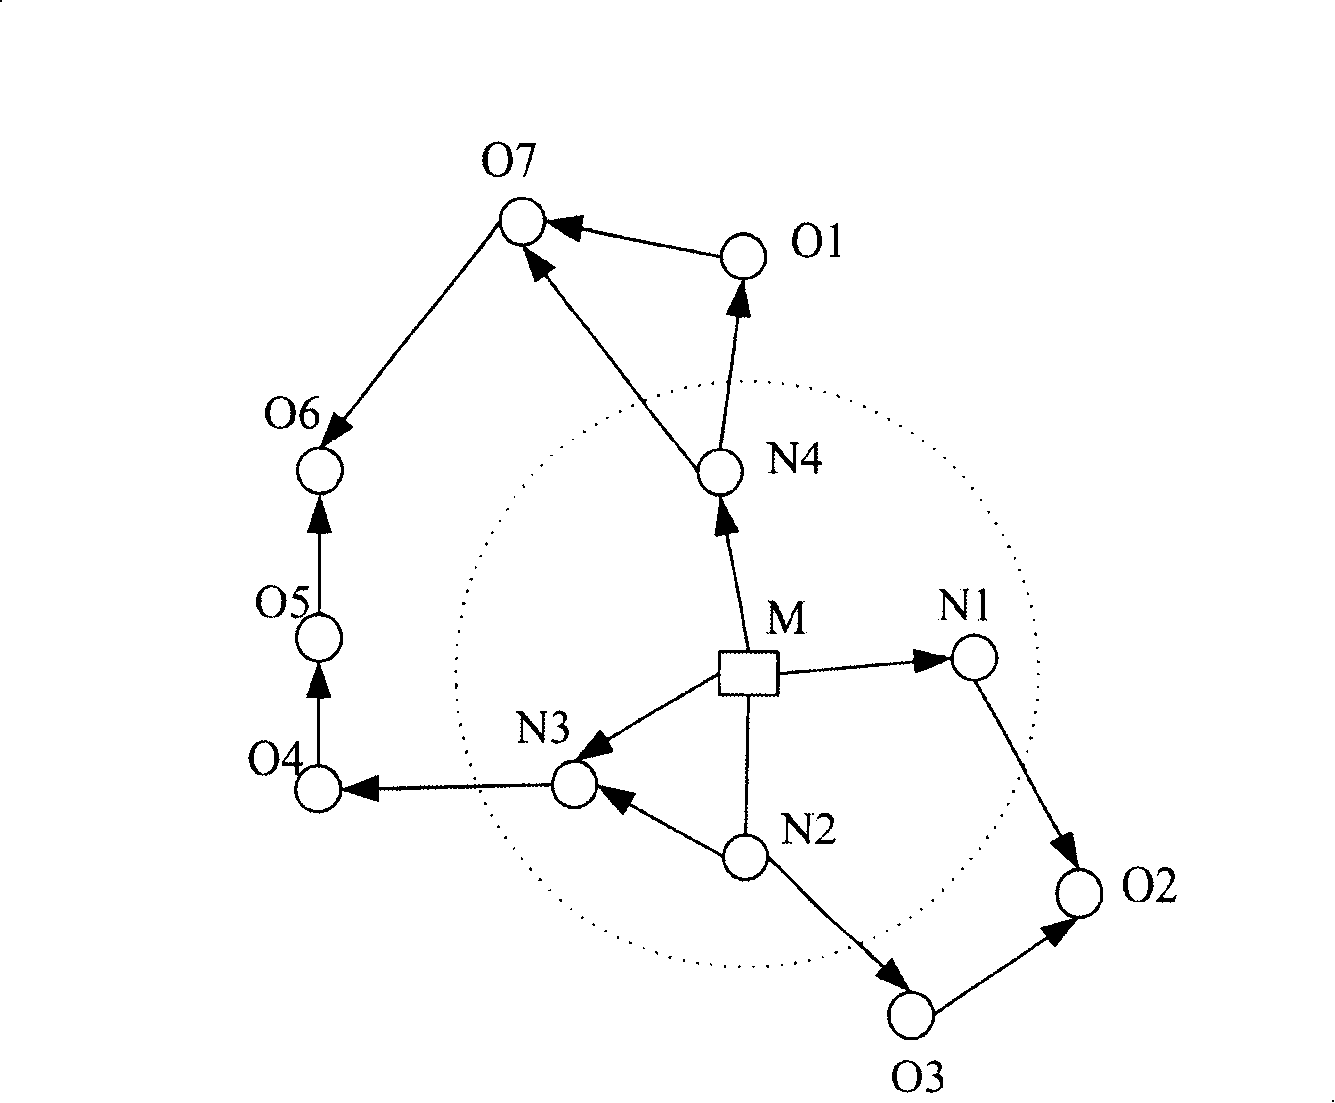 Method and node equipment for improving mobile self-network grouping security